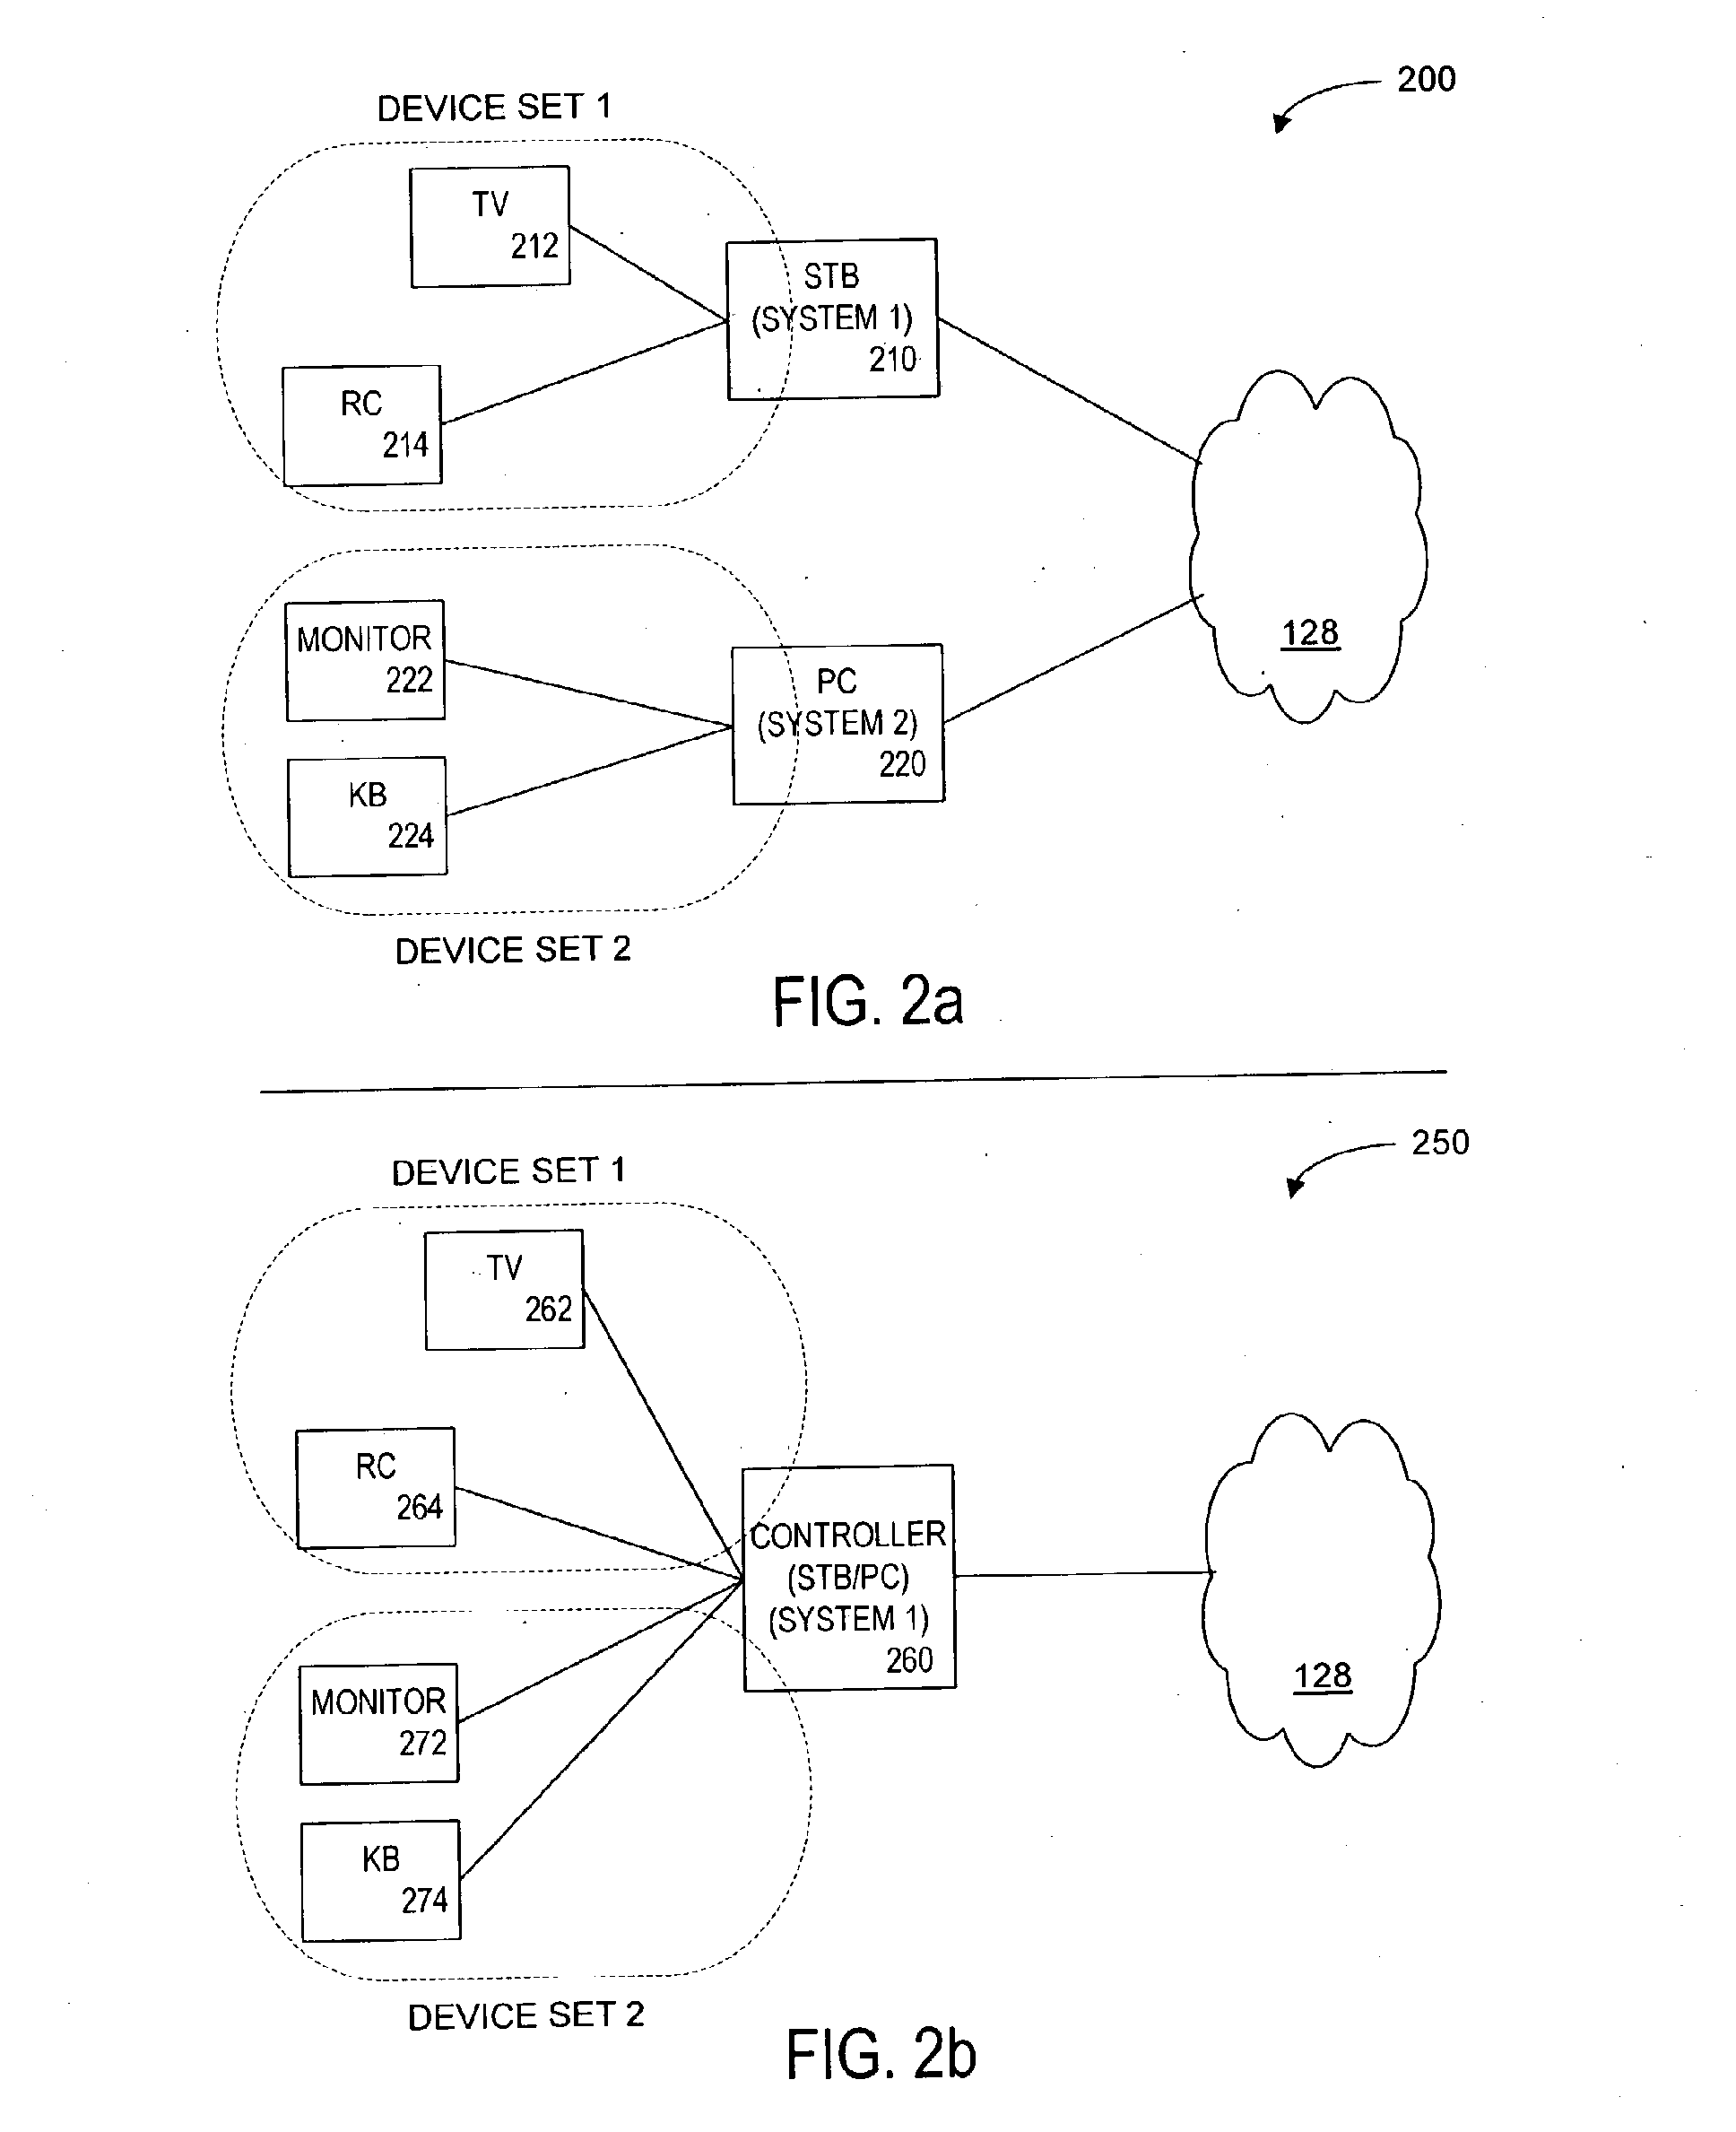 Method and Apparatus for Browsing Using Multiple Coordinated Device Sets